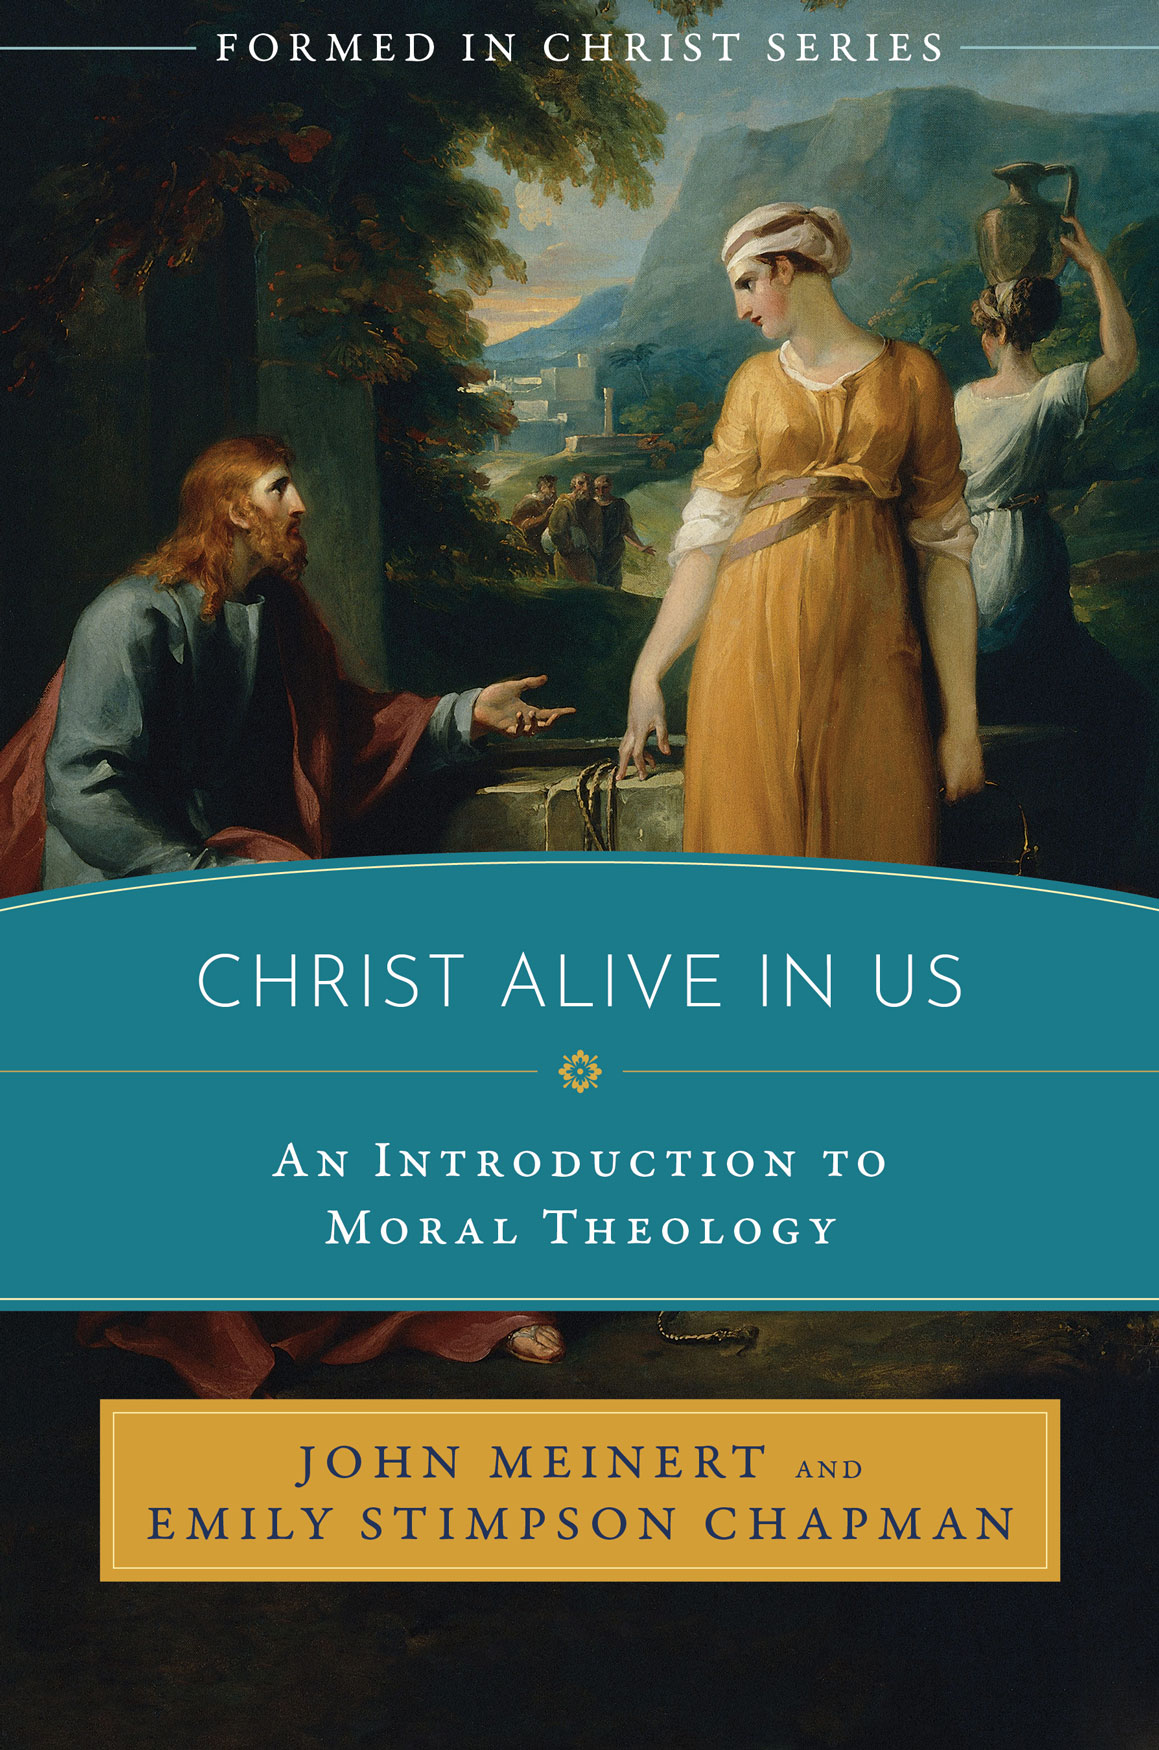 Formed in Christ Christ Alive in Us / John Meinert and Emily Stimpson Chapman